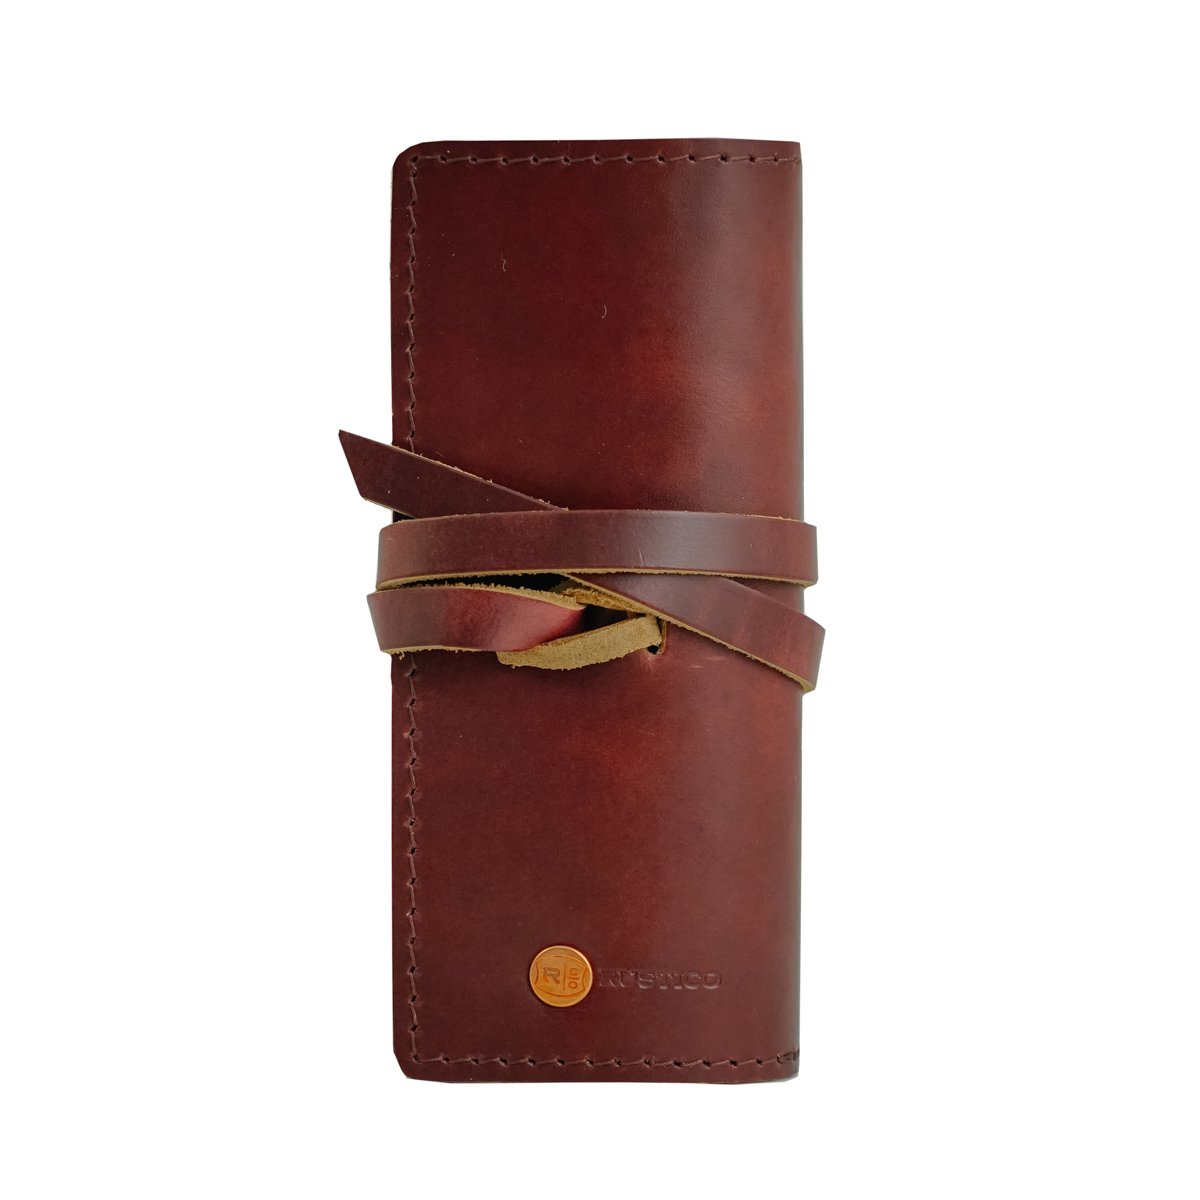 Leather Fly Fishing Wallet - Book of Flies